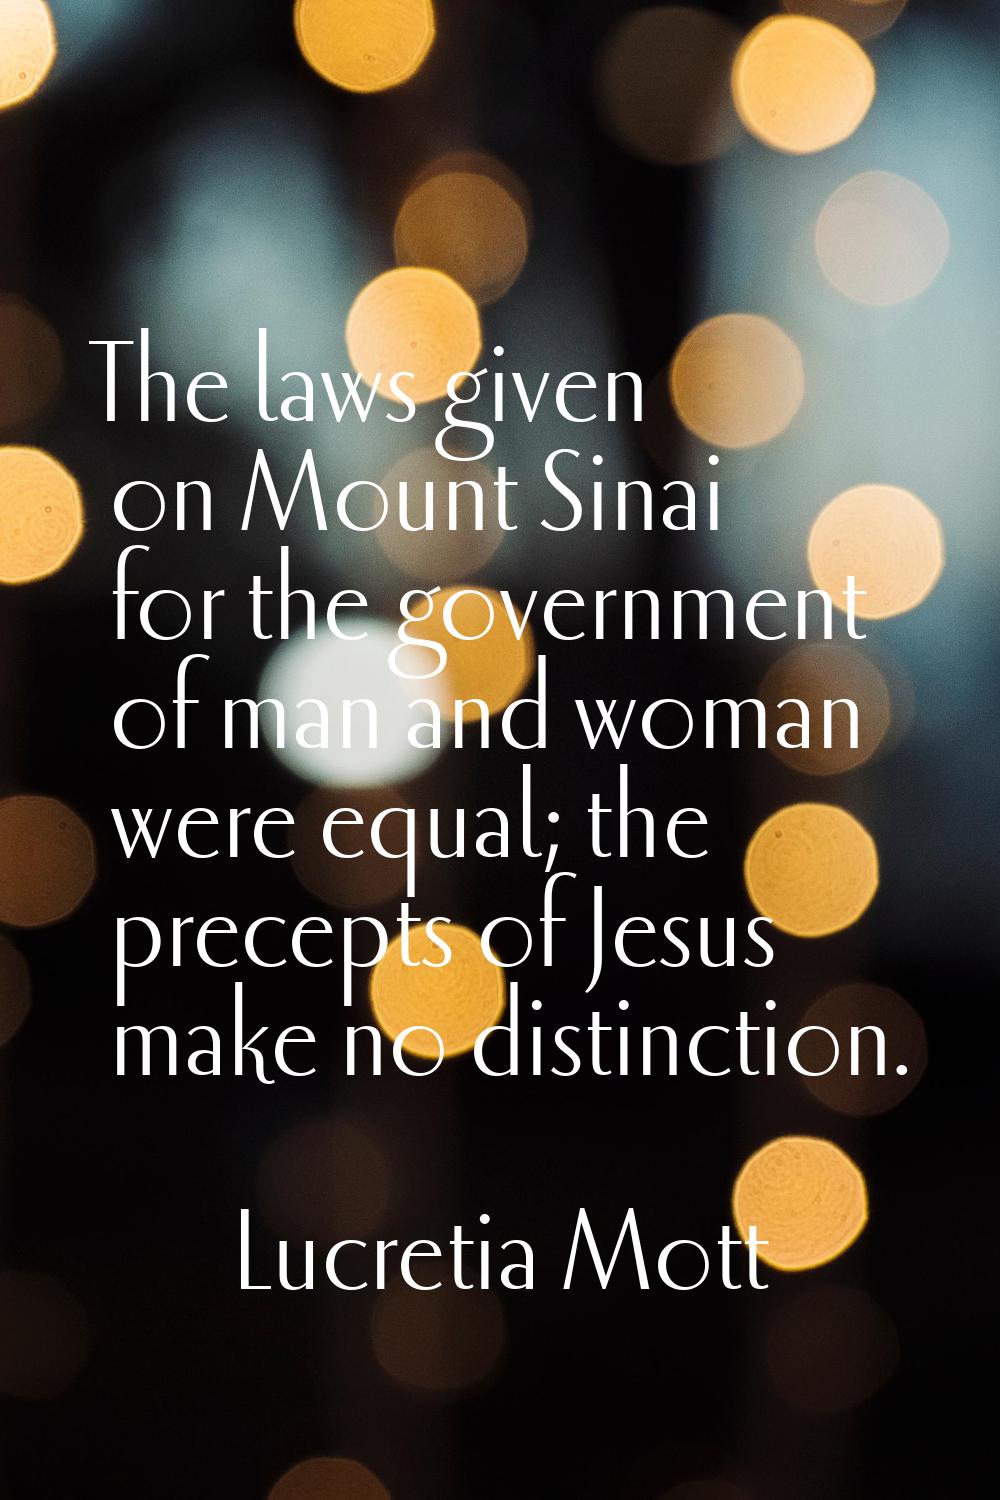 The laws given on Mount Sinai for the government of man and woman were equal; the precepts of Jesus